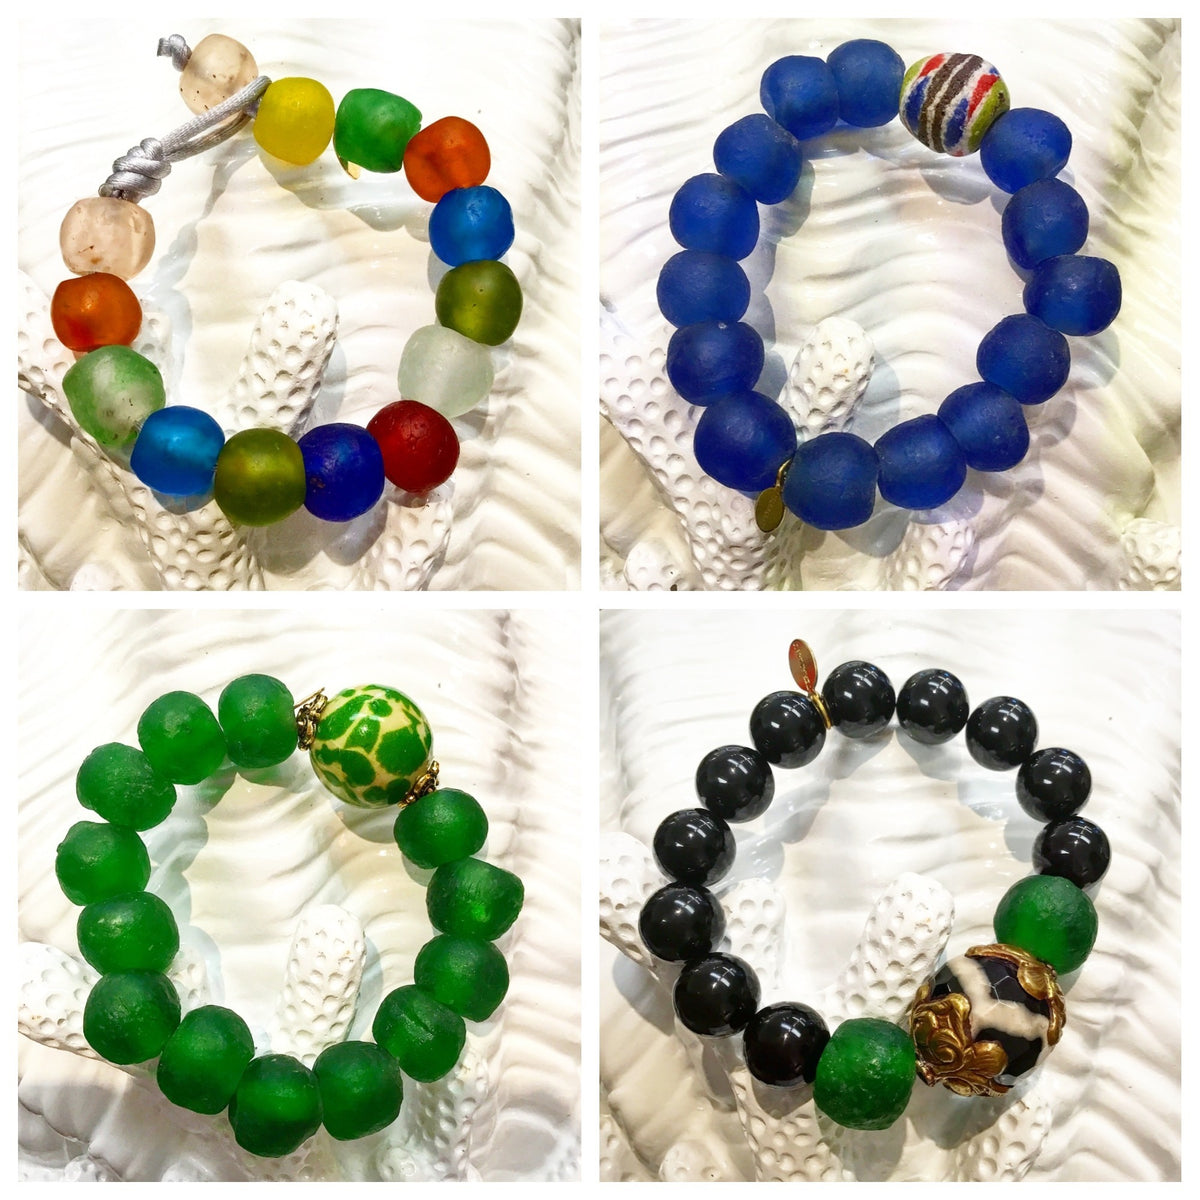 "Want It" Wednesday: The Teramasu One-of-a-Kind Tumbled Glass Bracelet Collection